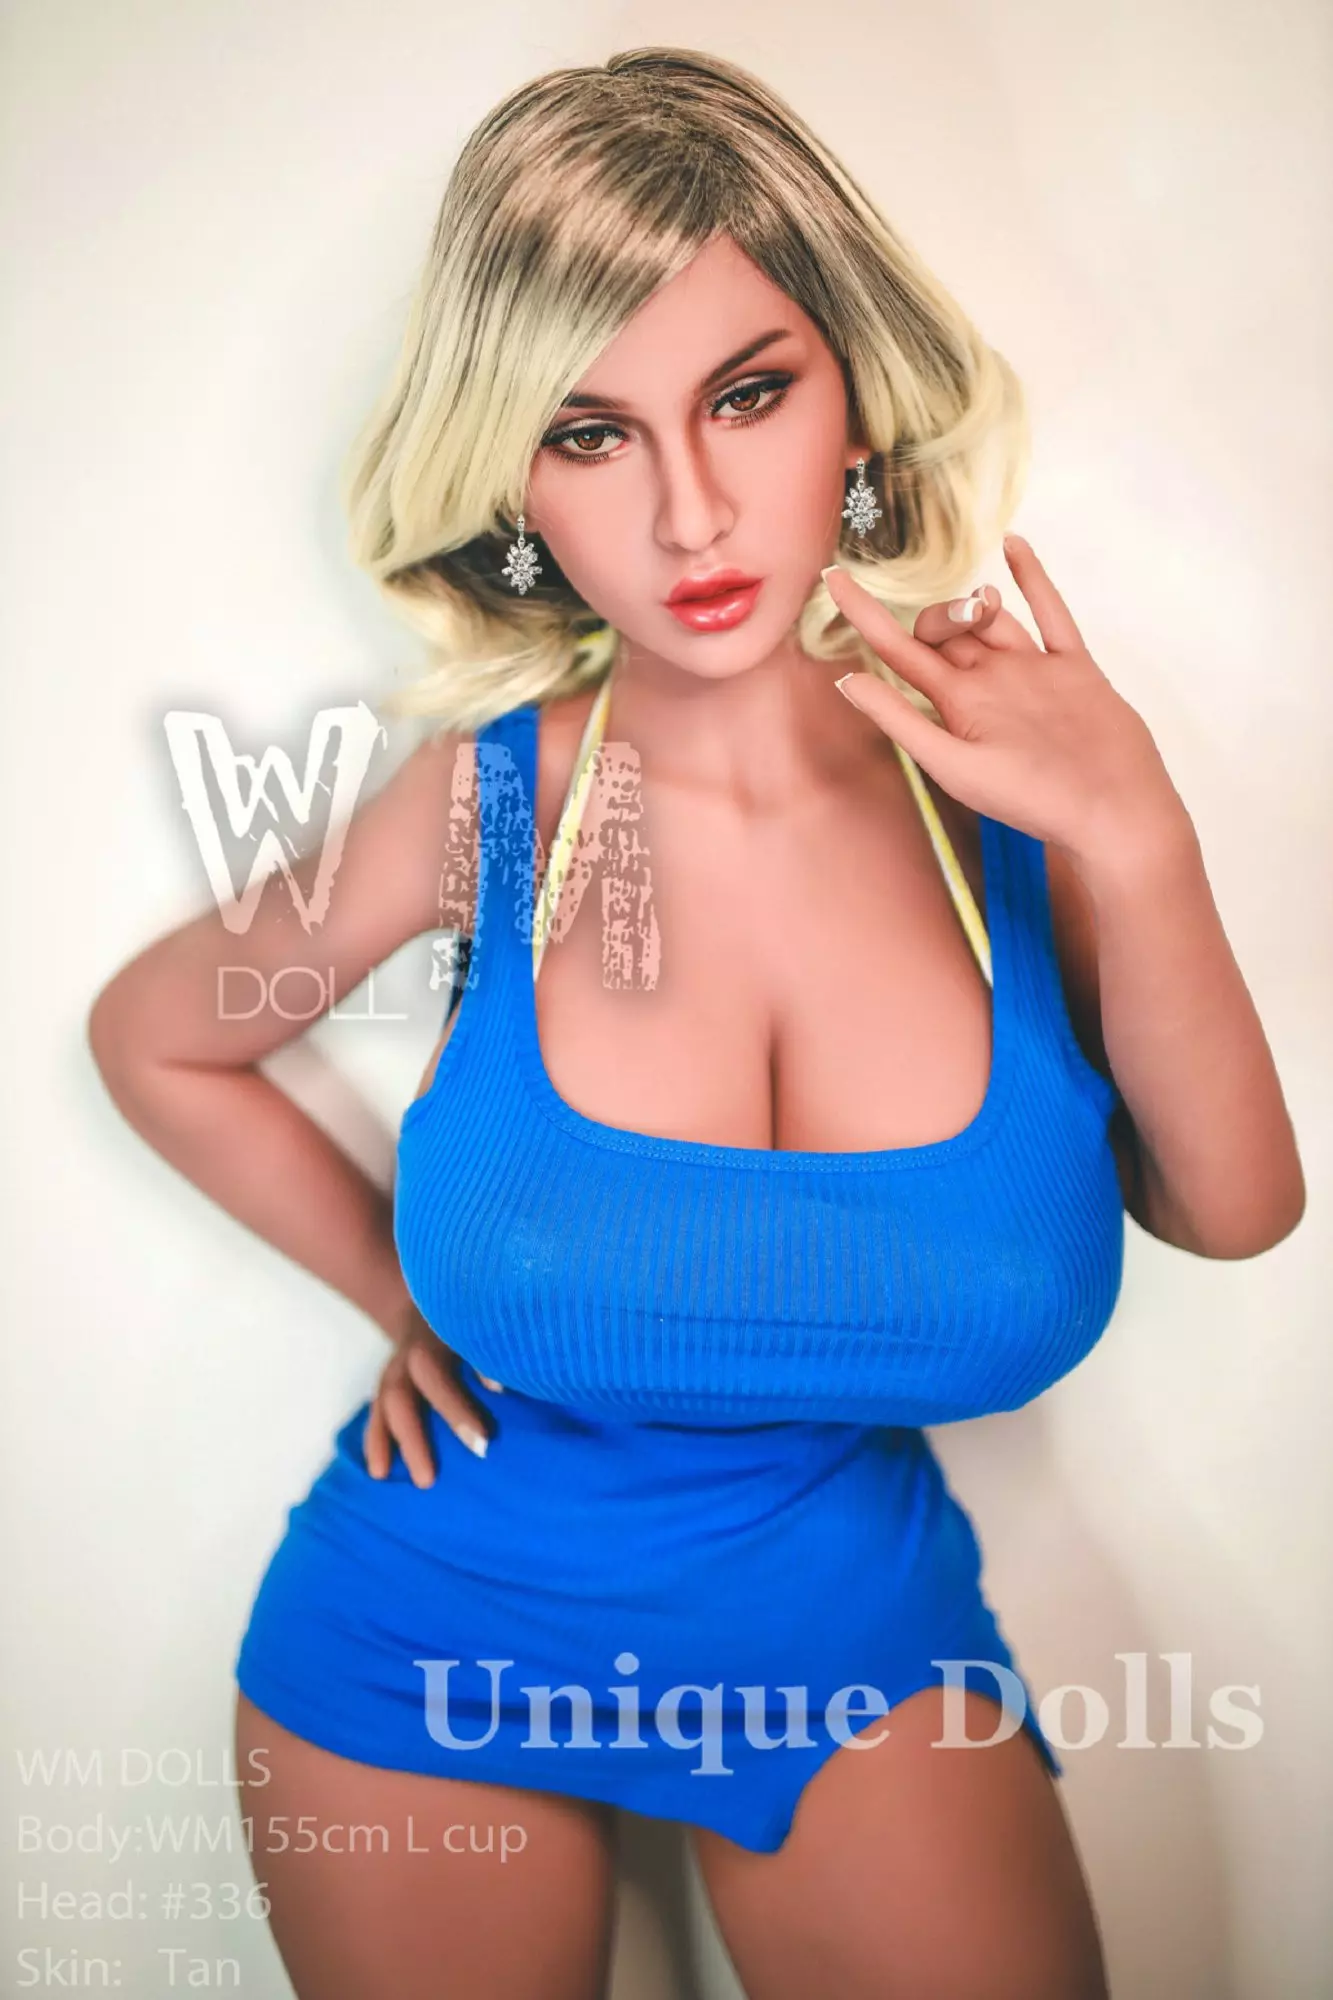 WM Doll 155cm L cup Vicky with fuckable big boobs